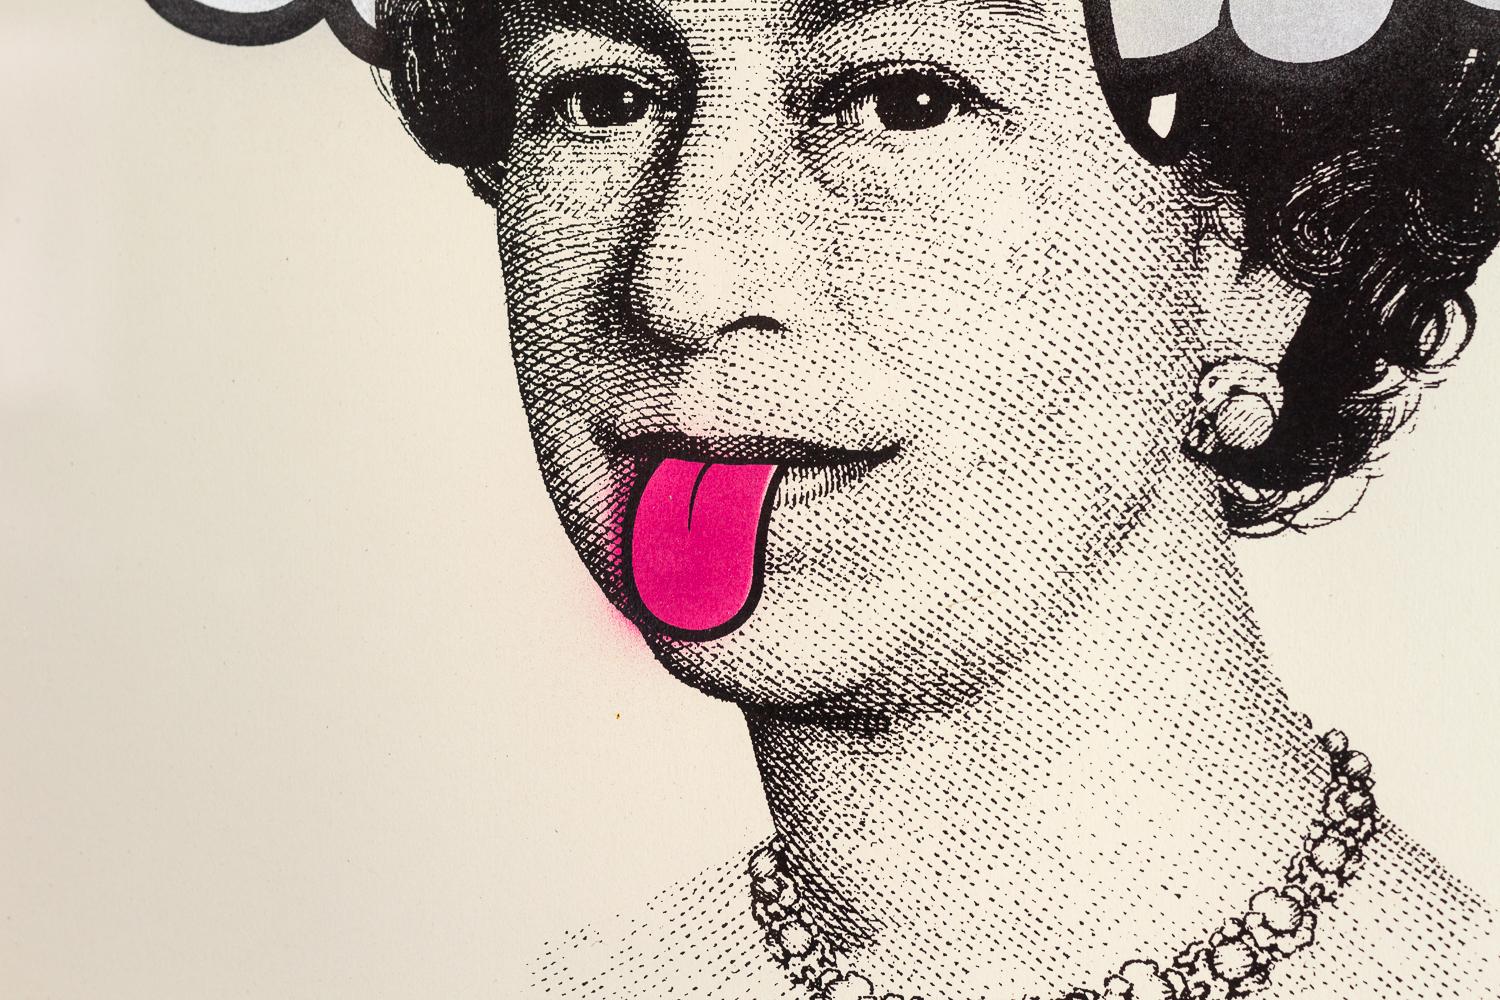 Dog Save The Queen by D*Face
Urban Graffiti Art screen-print on woven paper, signed in pencil, numbered 211/250. Silver ears edition. Very good condition.
Please note, this piece is not framed. Poster will be shipped securely in an art tube.